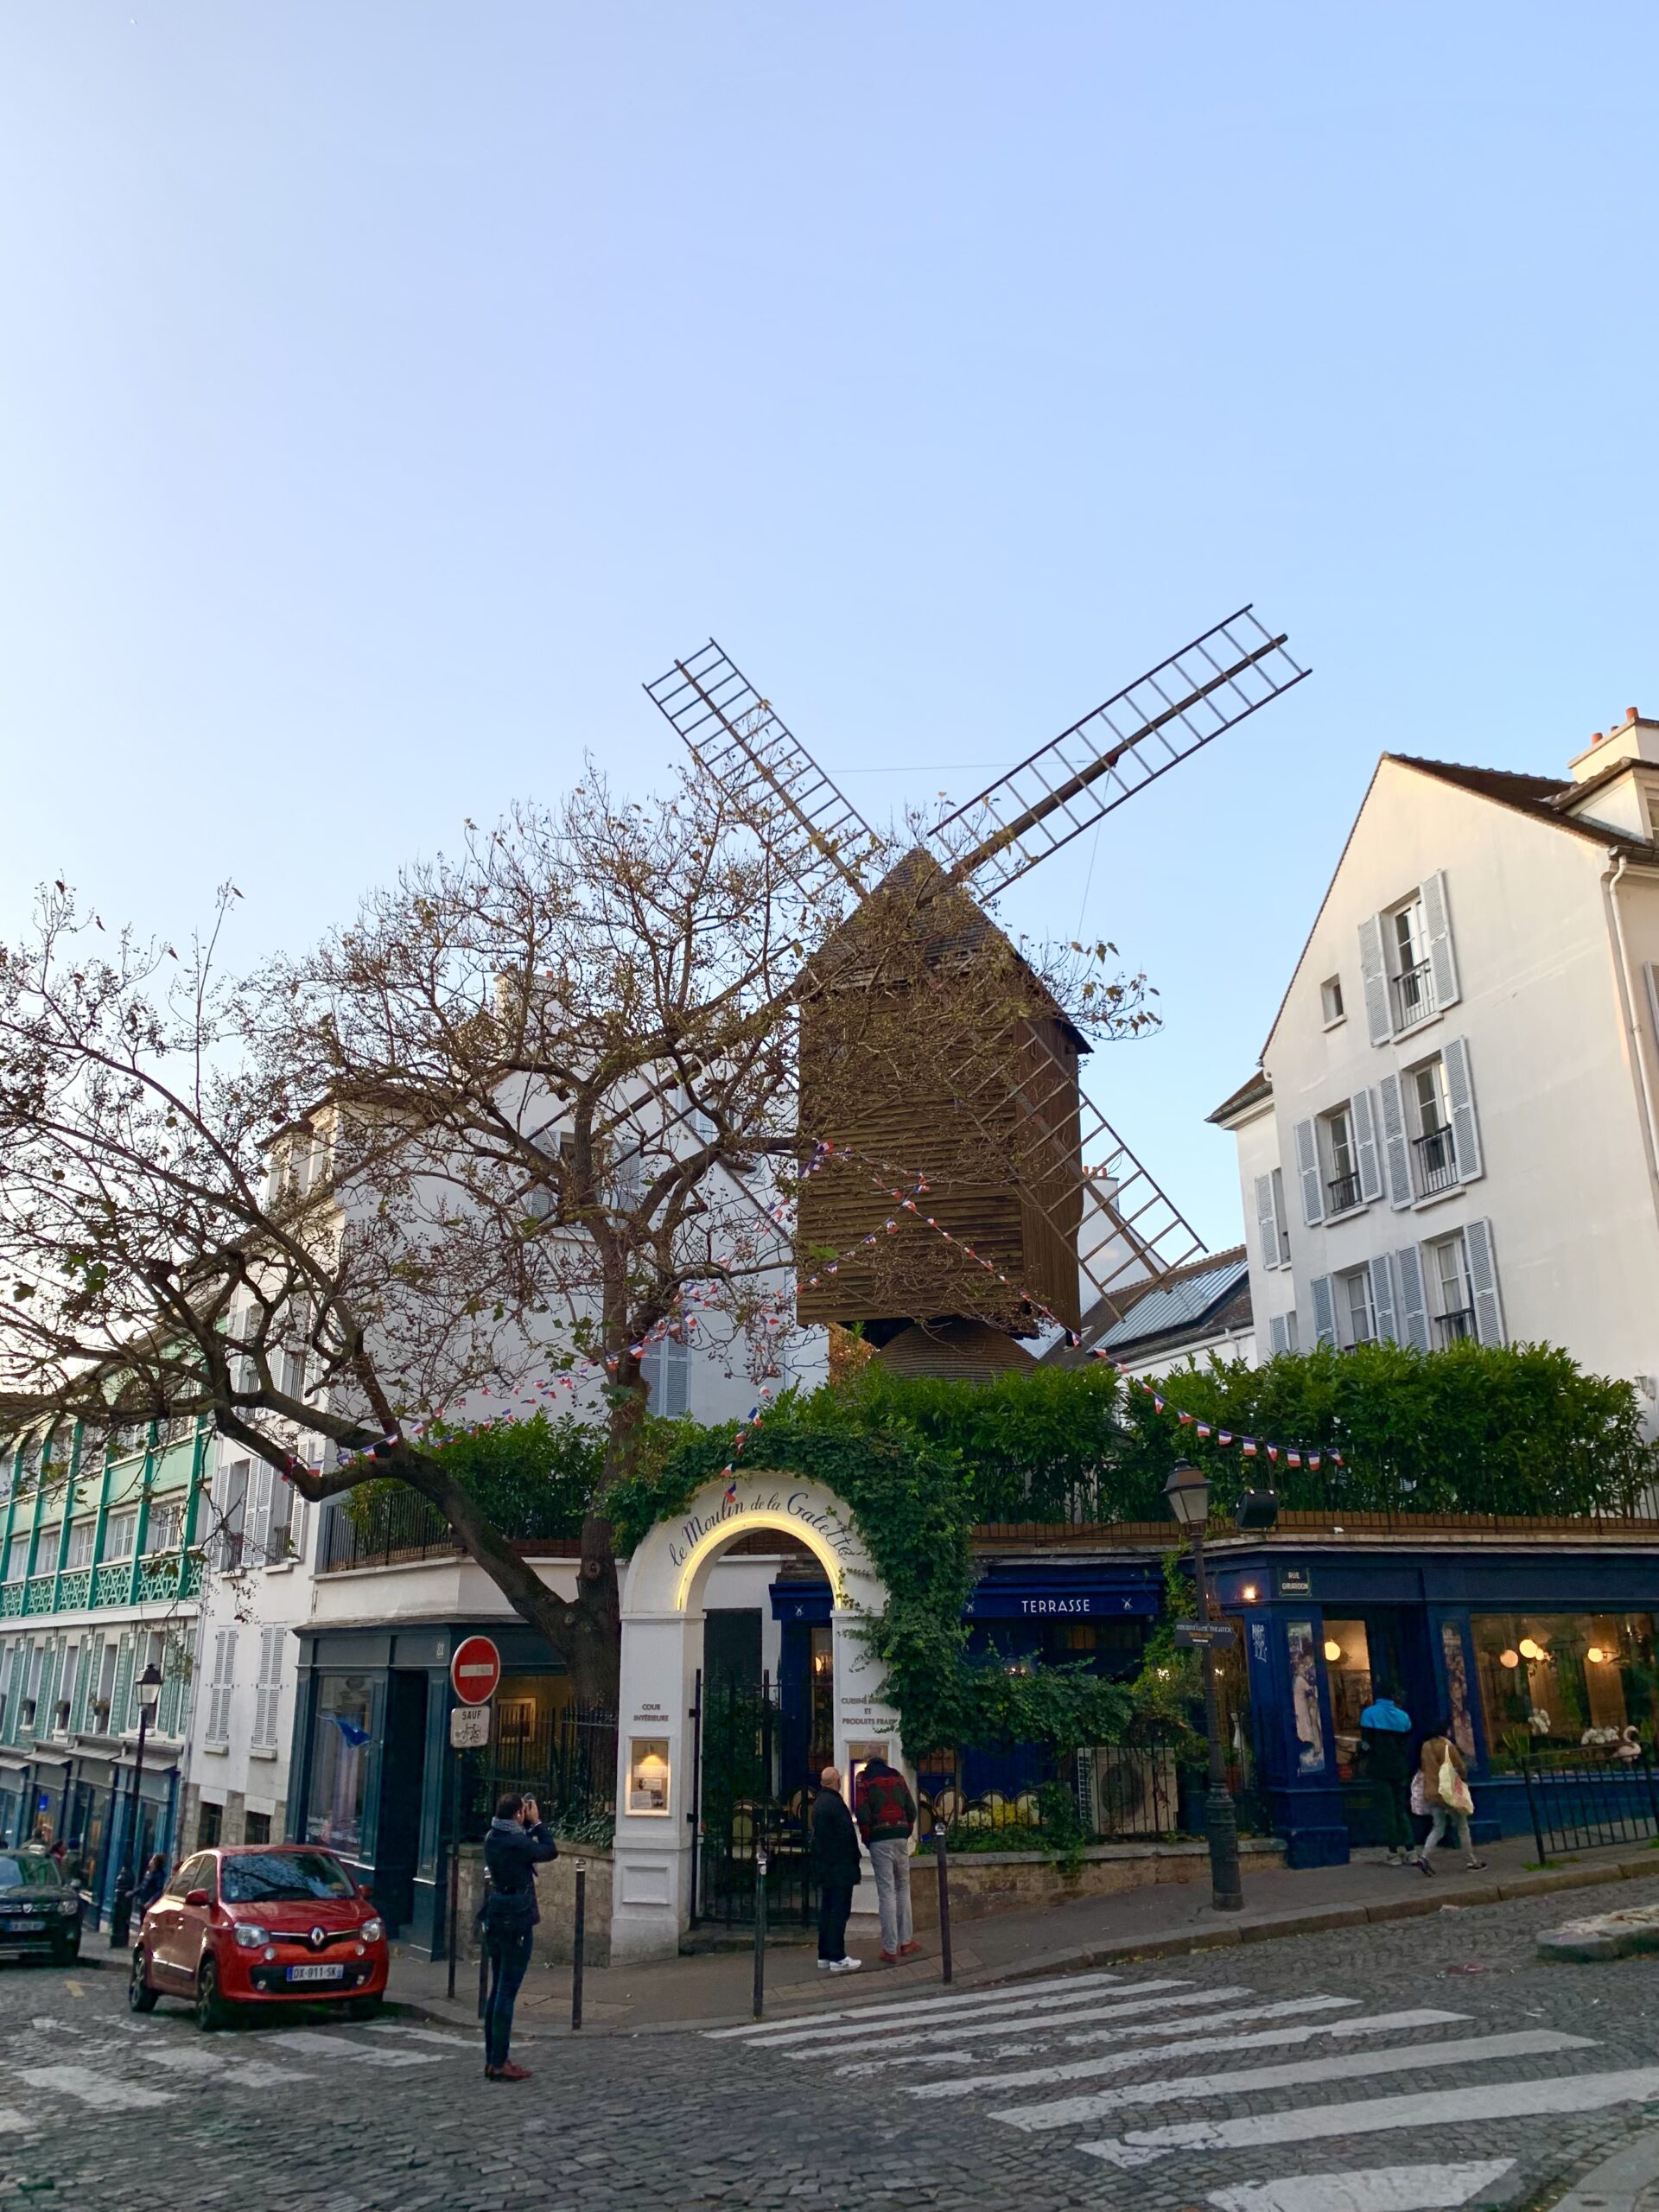 A windmill above a restaurant that is blue. This is one of the things to do in Montmartre.